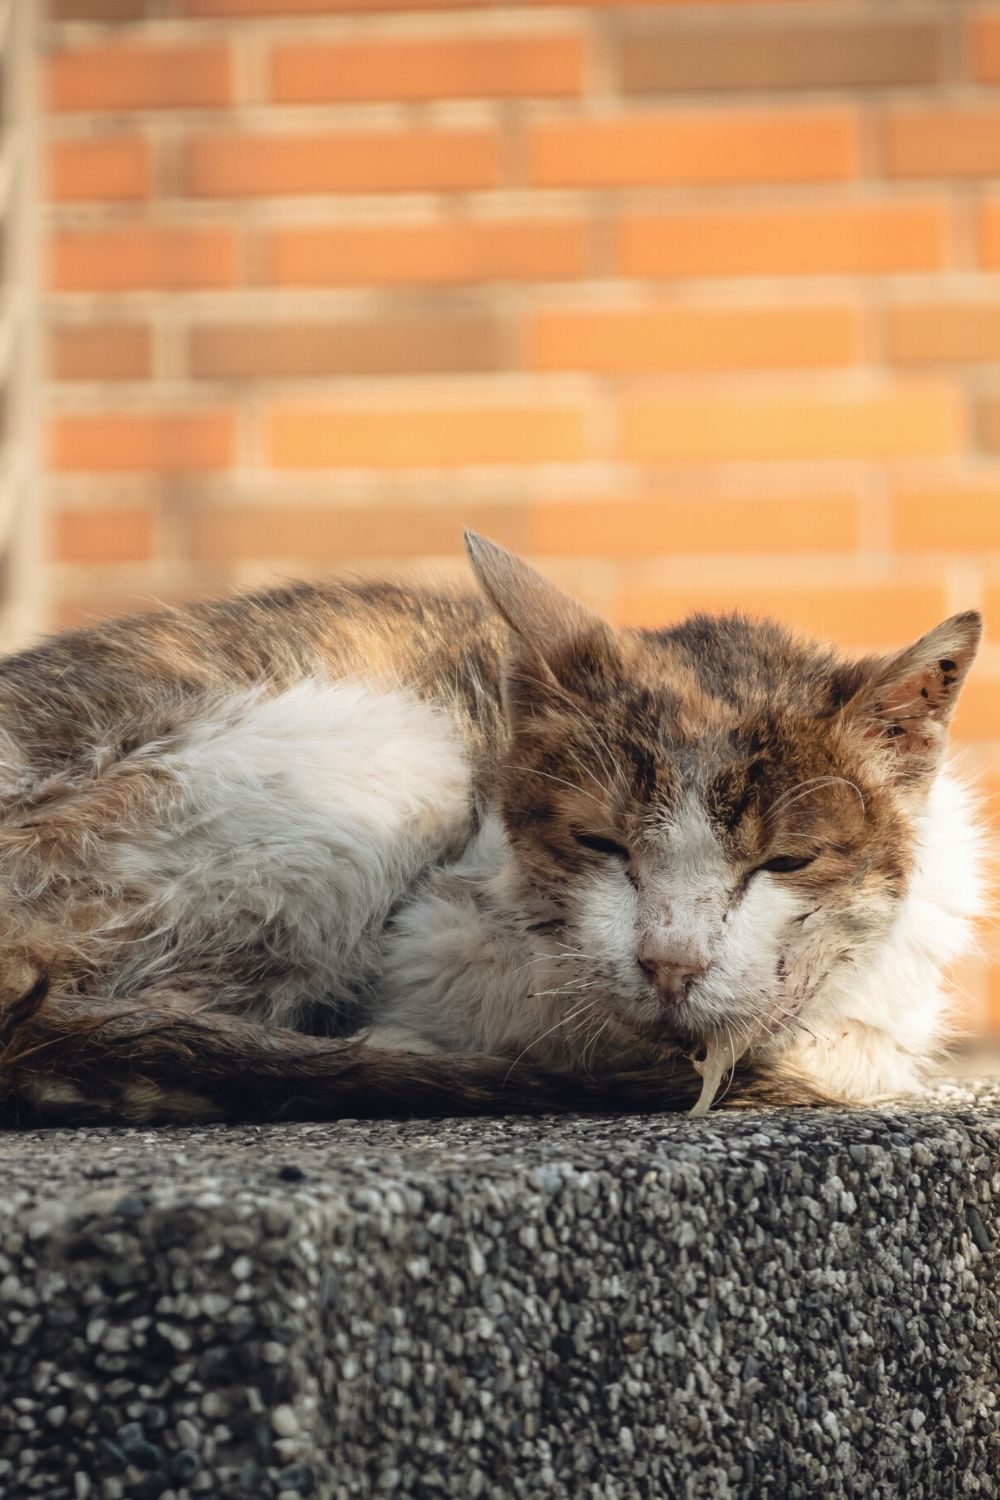 A cat who's excessively drooling accompanied by excessive twitching, is a medical emergency